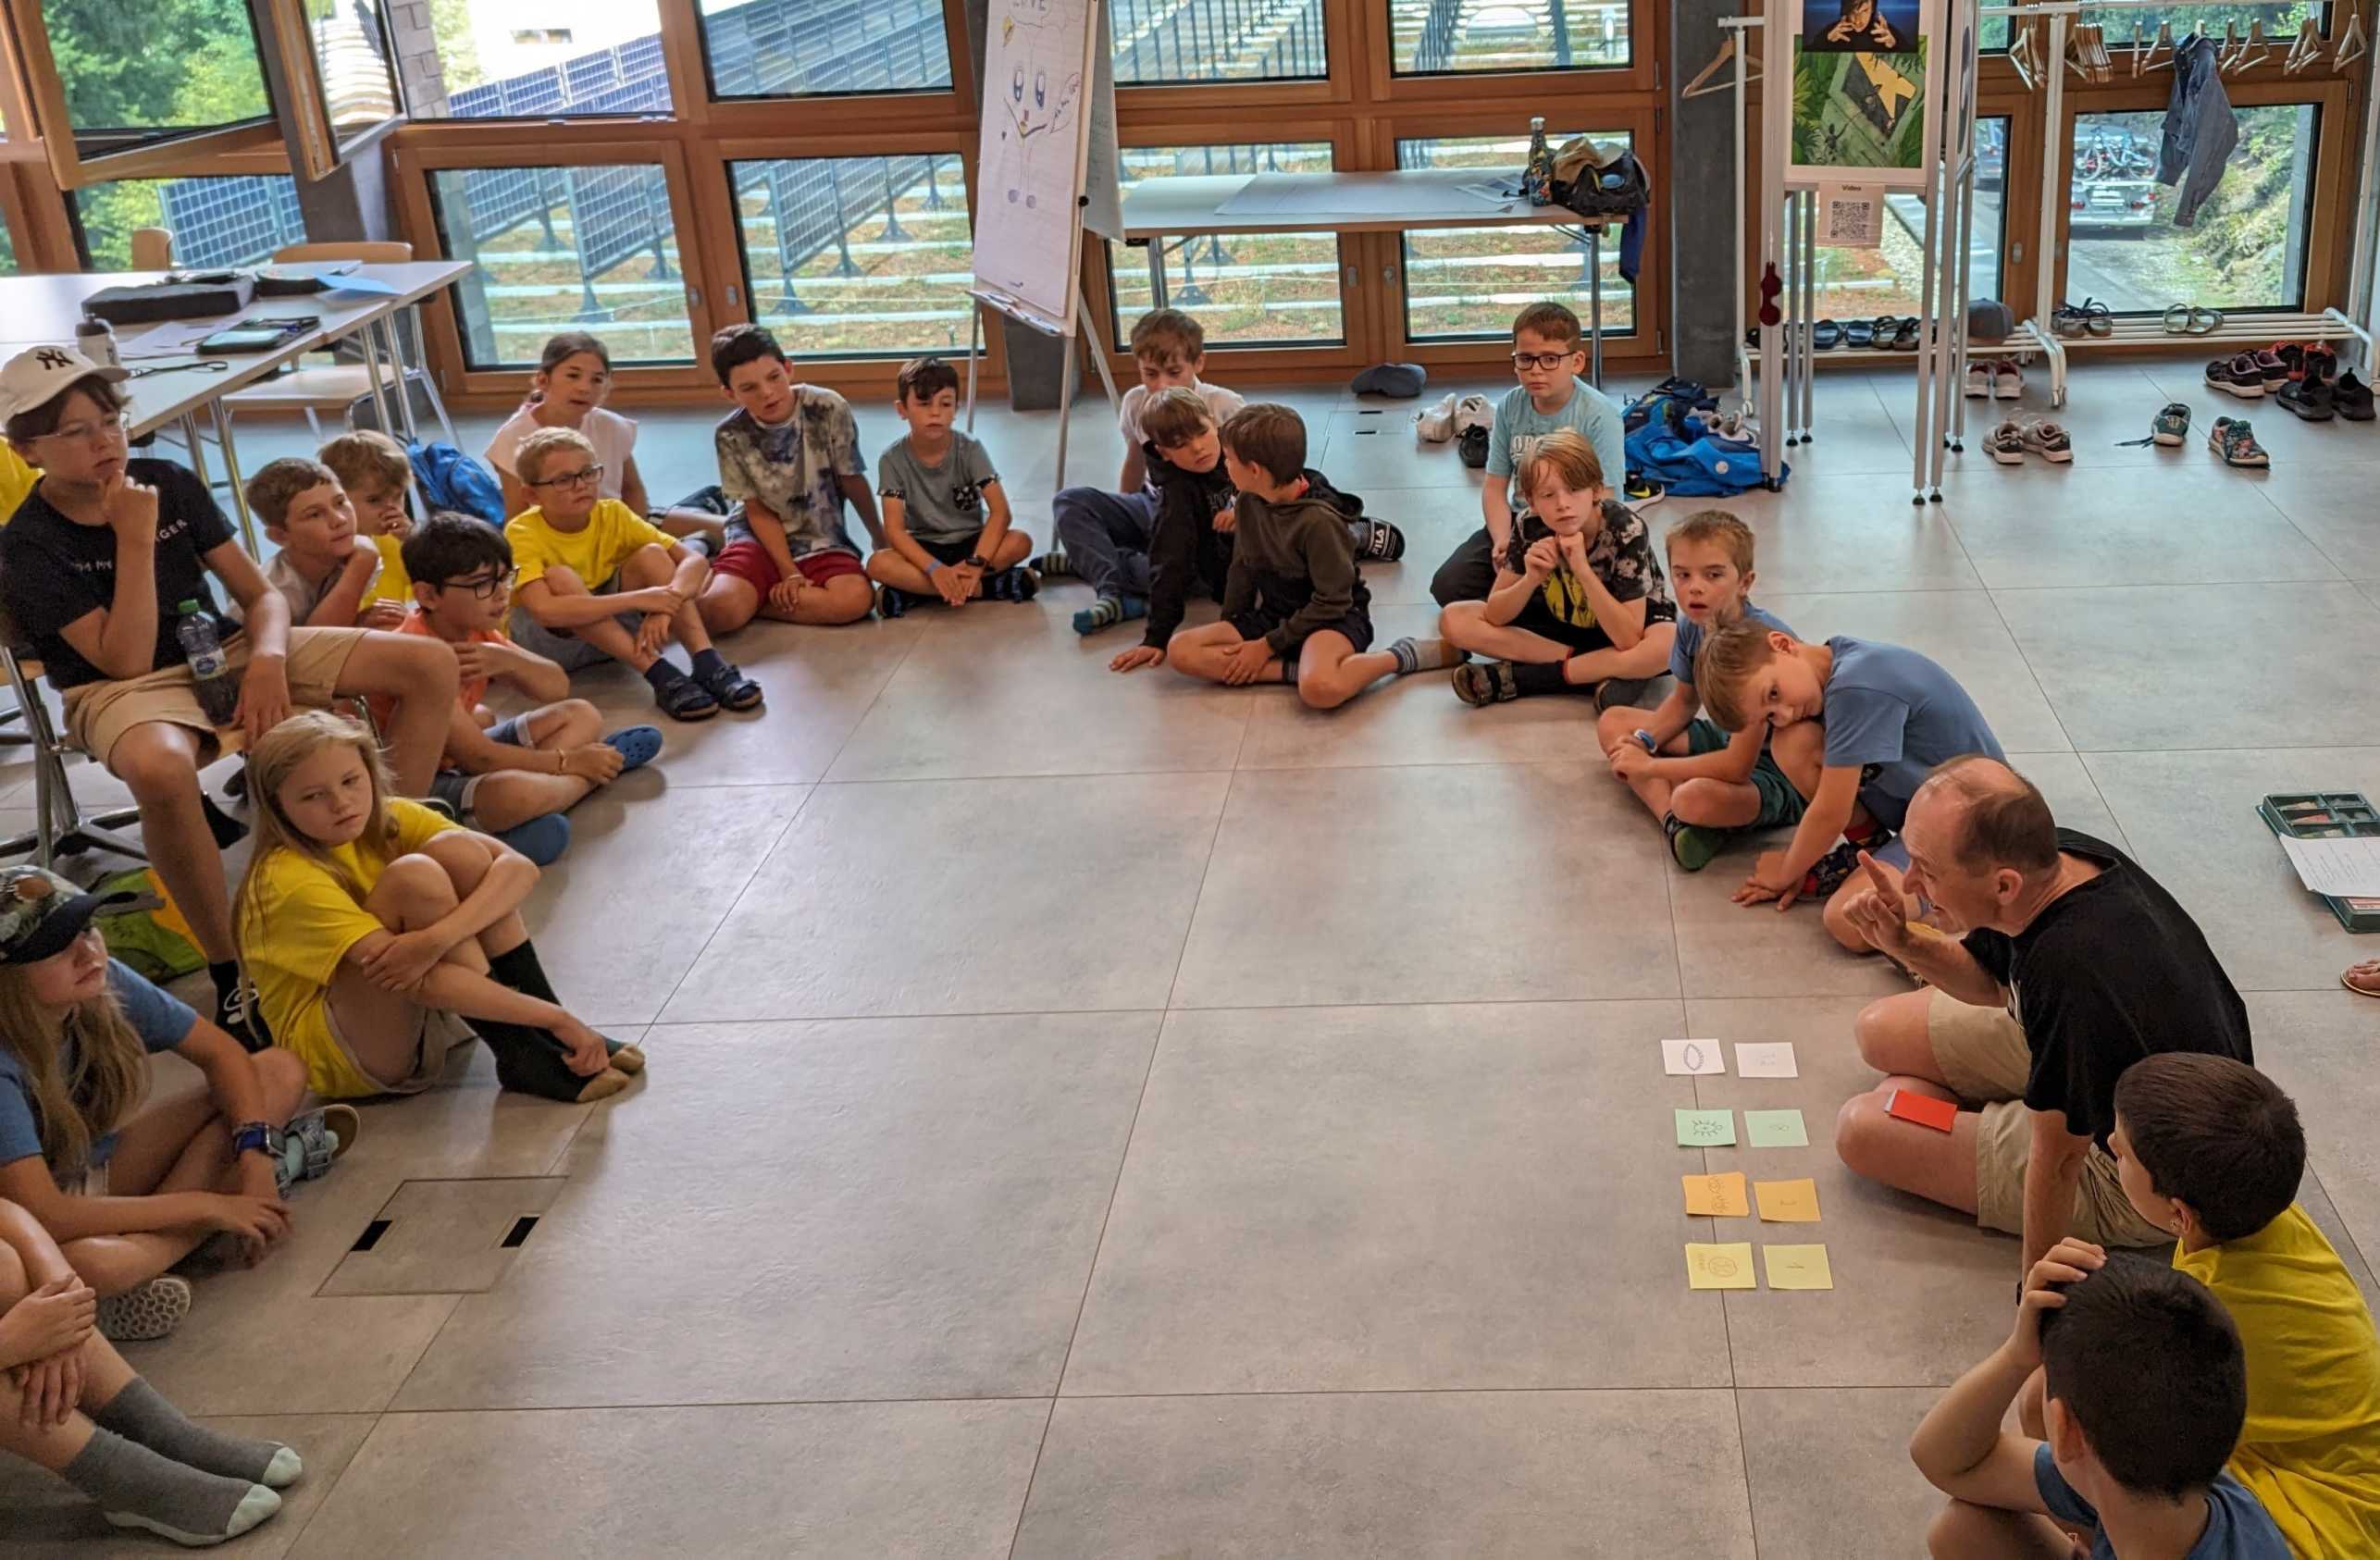 Many children sit in a circle and listen to Juraj Hromkovic's explanations.